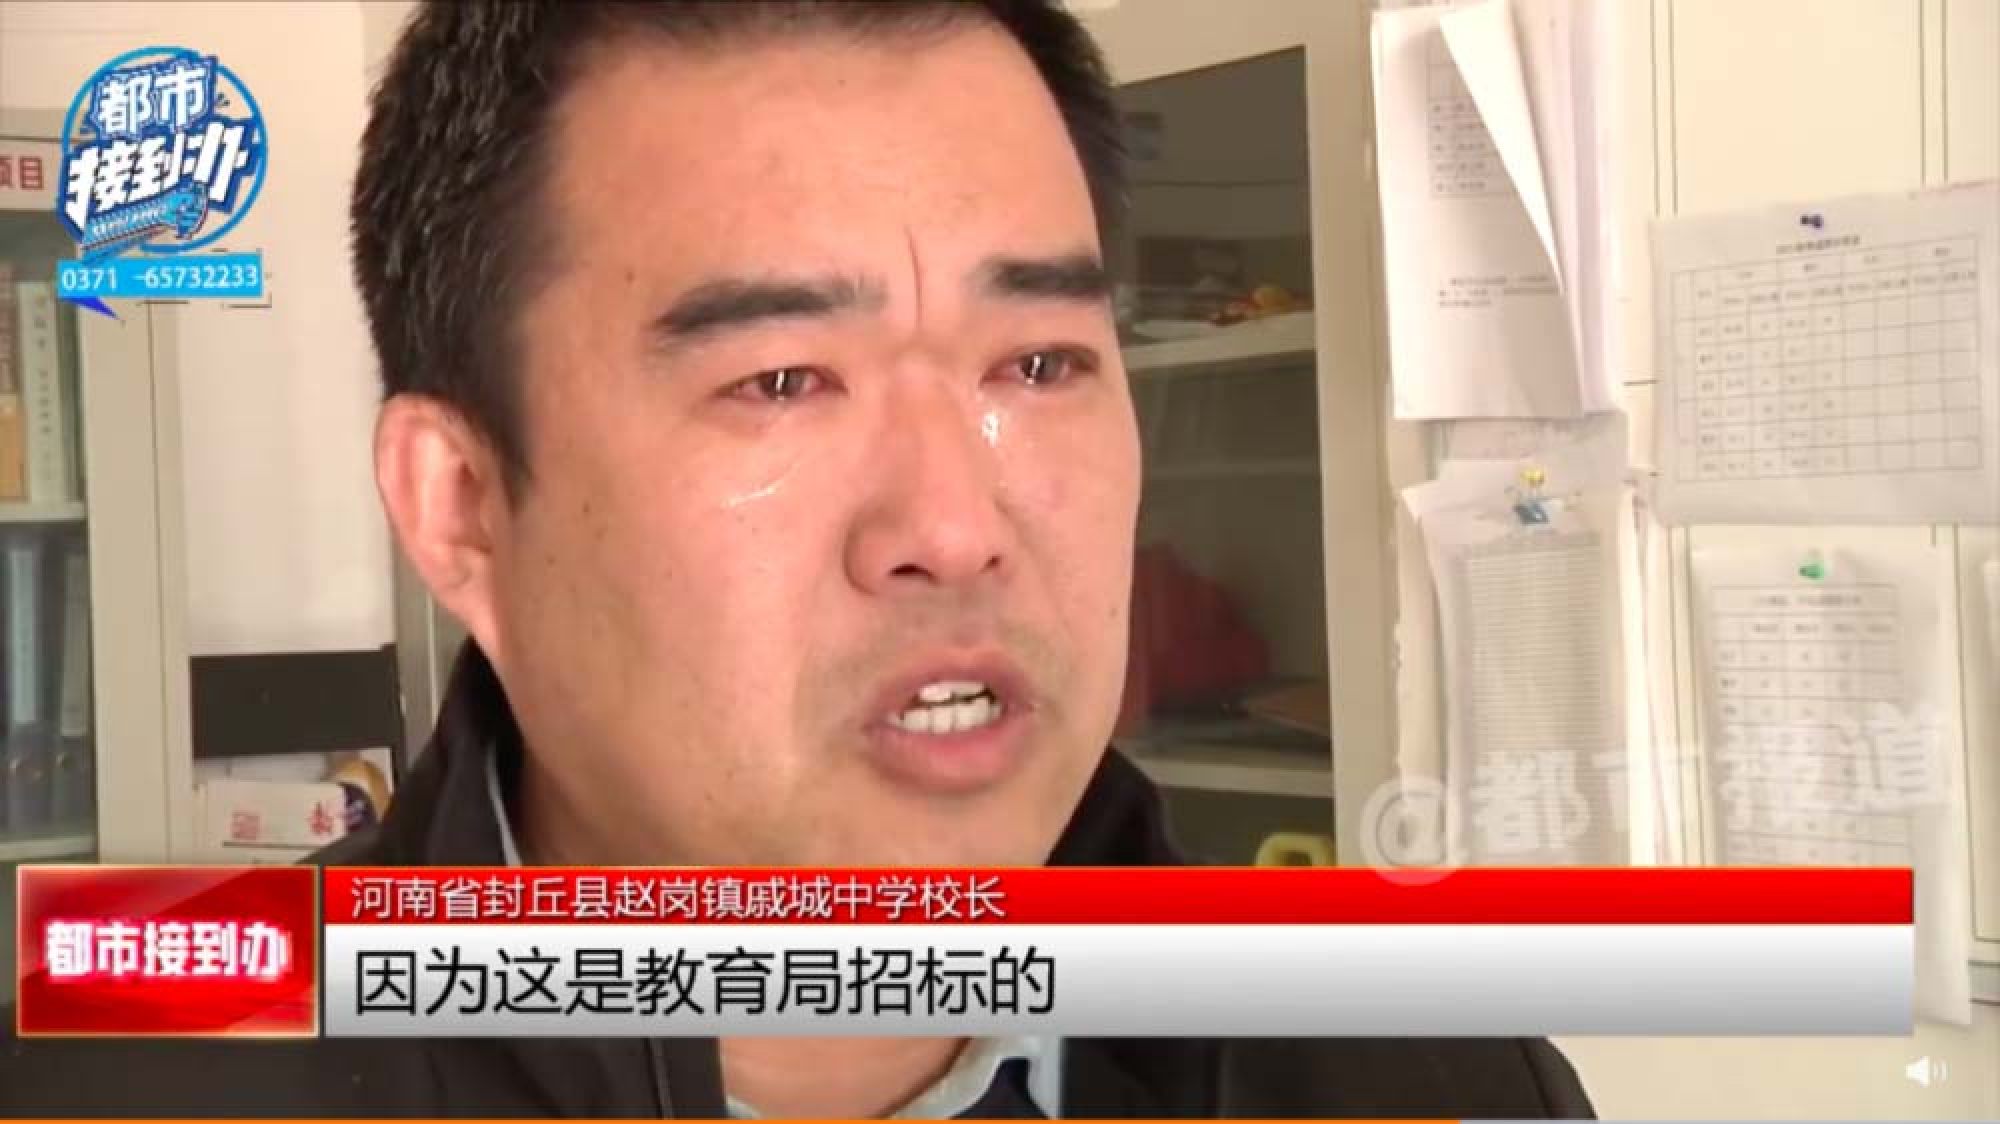 A video of the school’s headmaster crying went viral on social media. Photo: Credit: 163.com